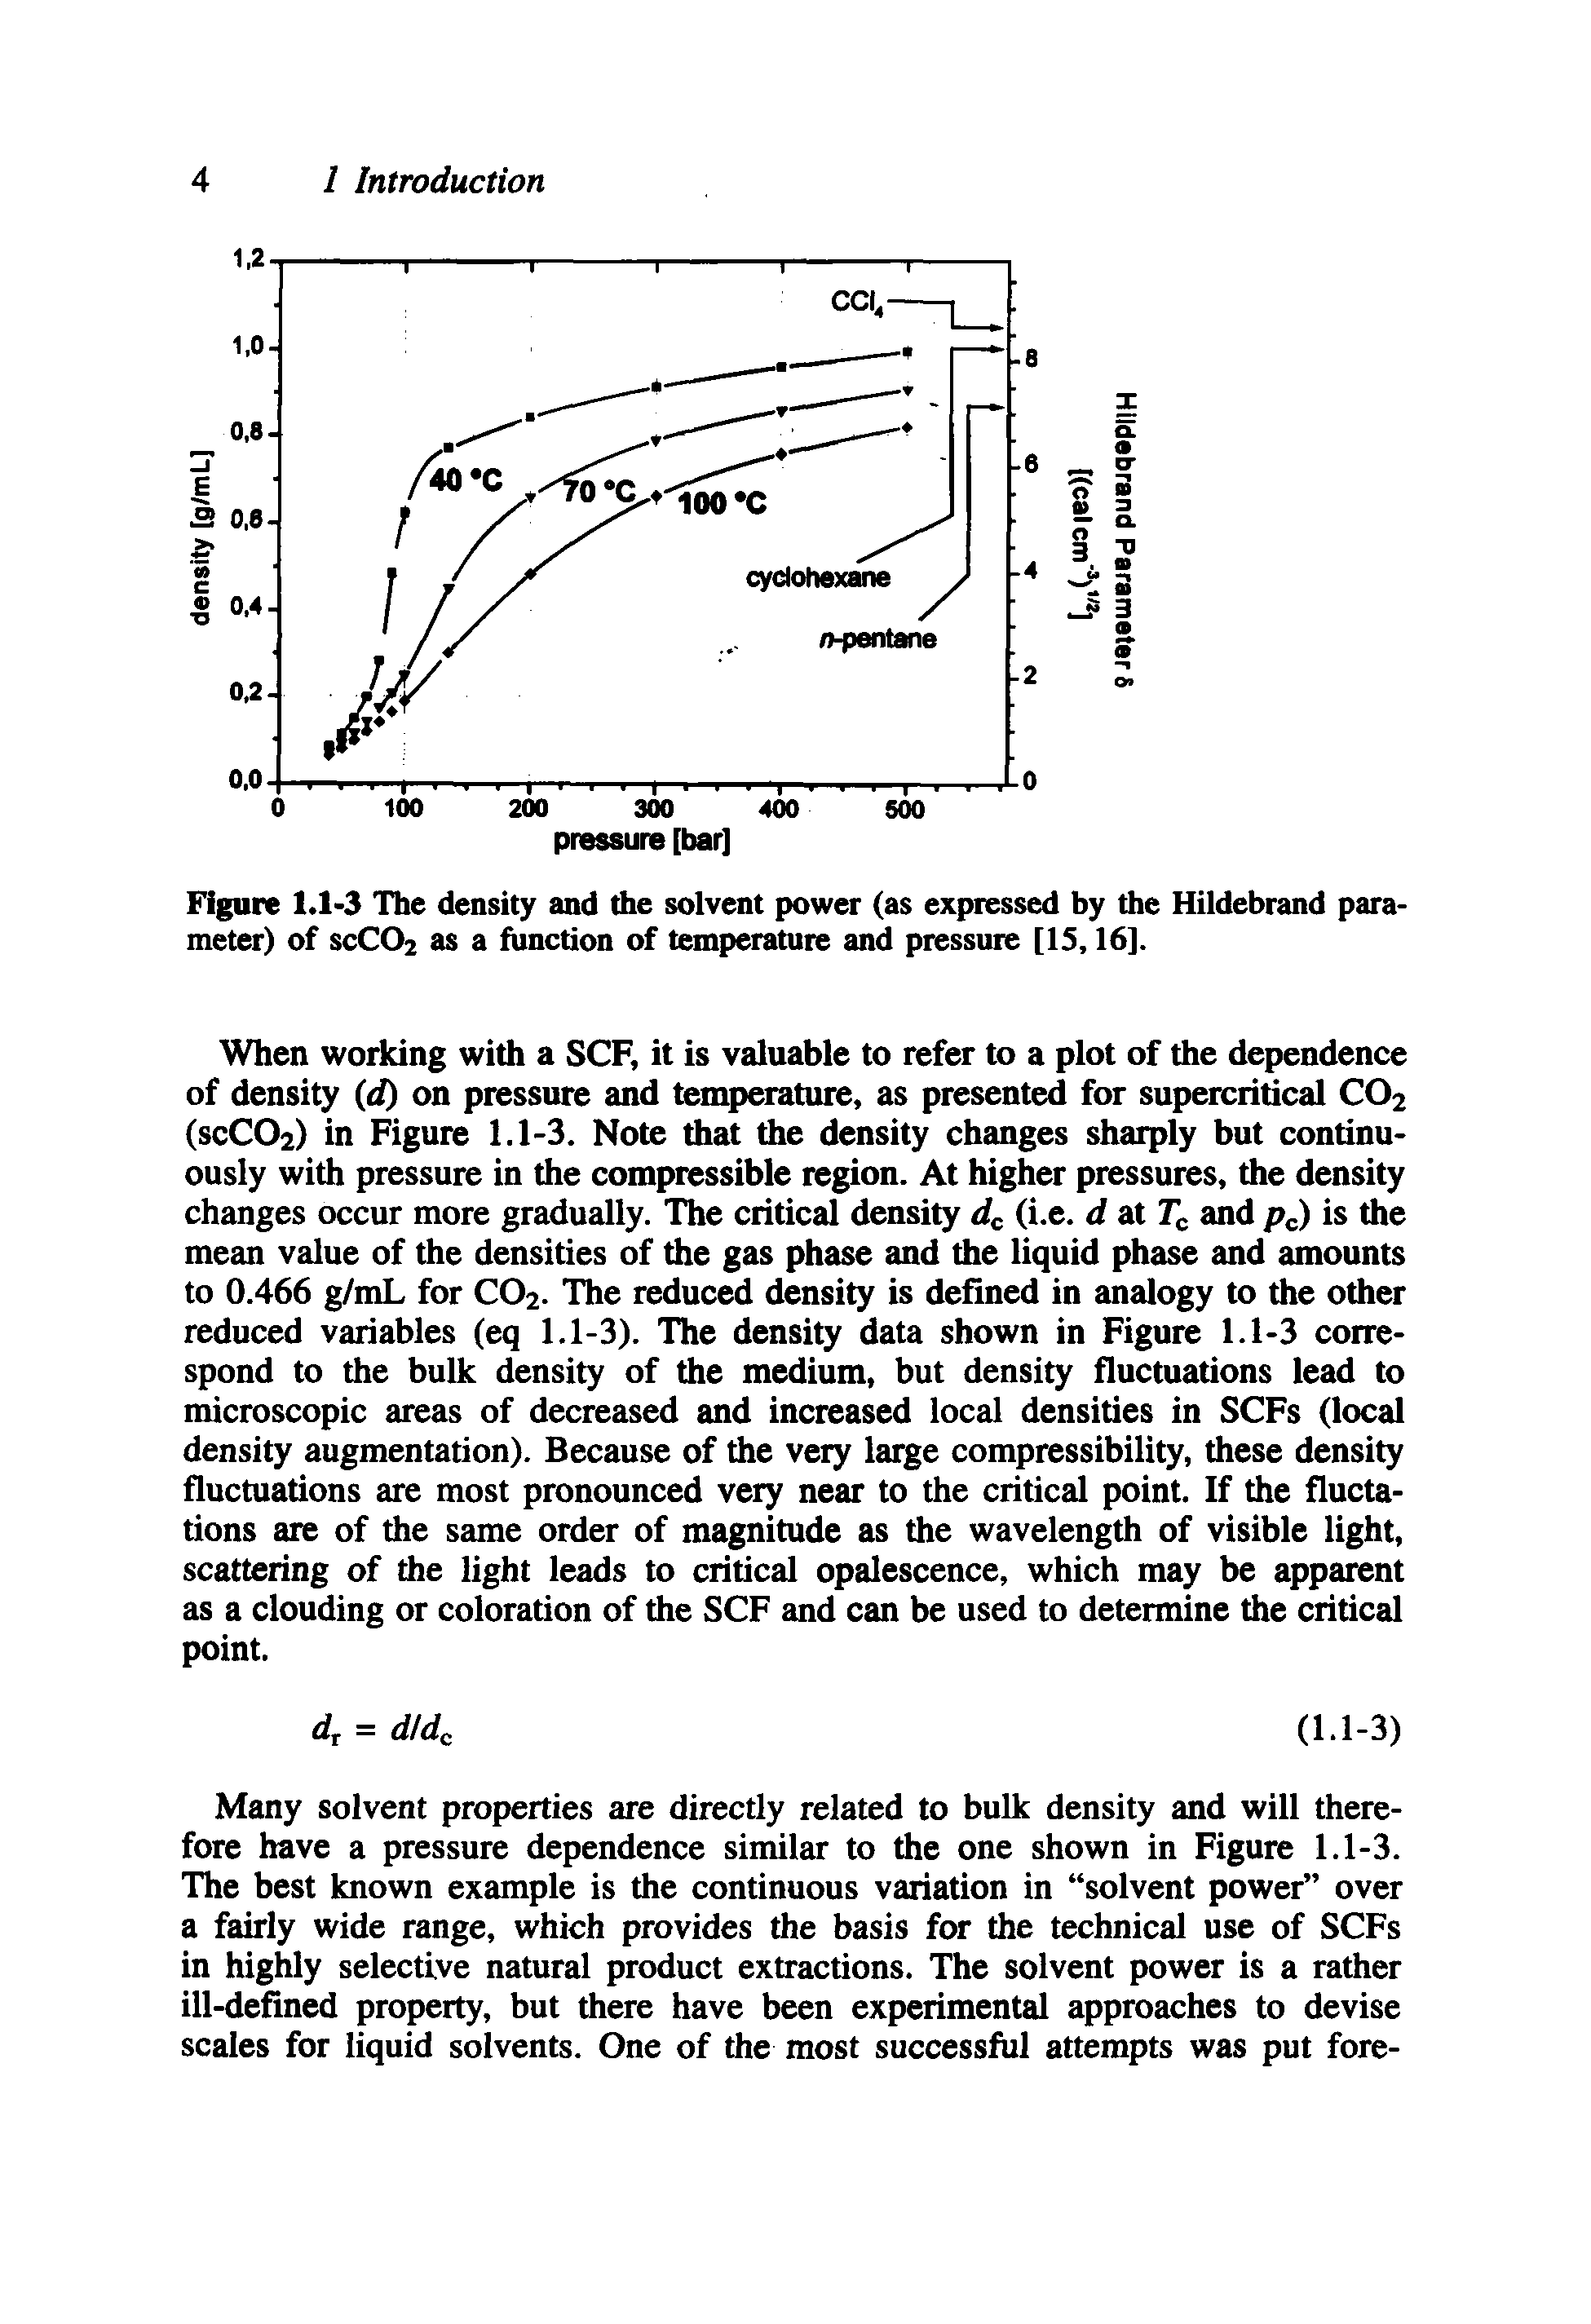 Figure 1.1-3 The density and the solvent power (as expressed by the Hildebrand parameter) of SCCO2 as a function of temperature and pressure [IS, 16].